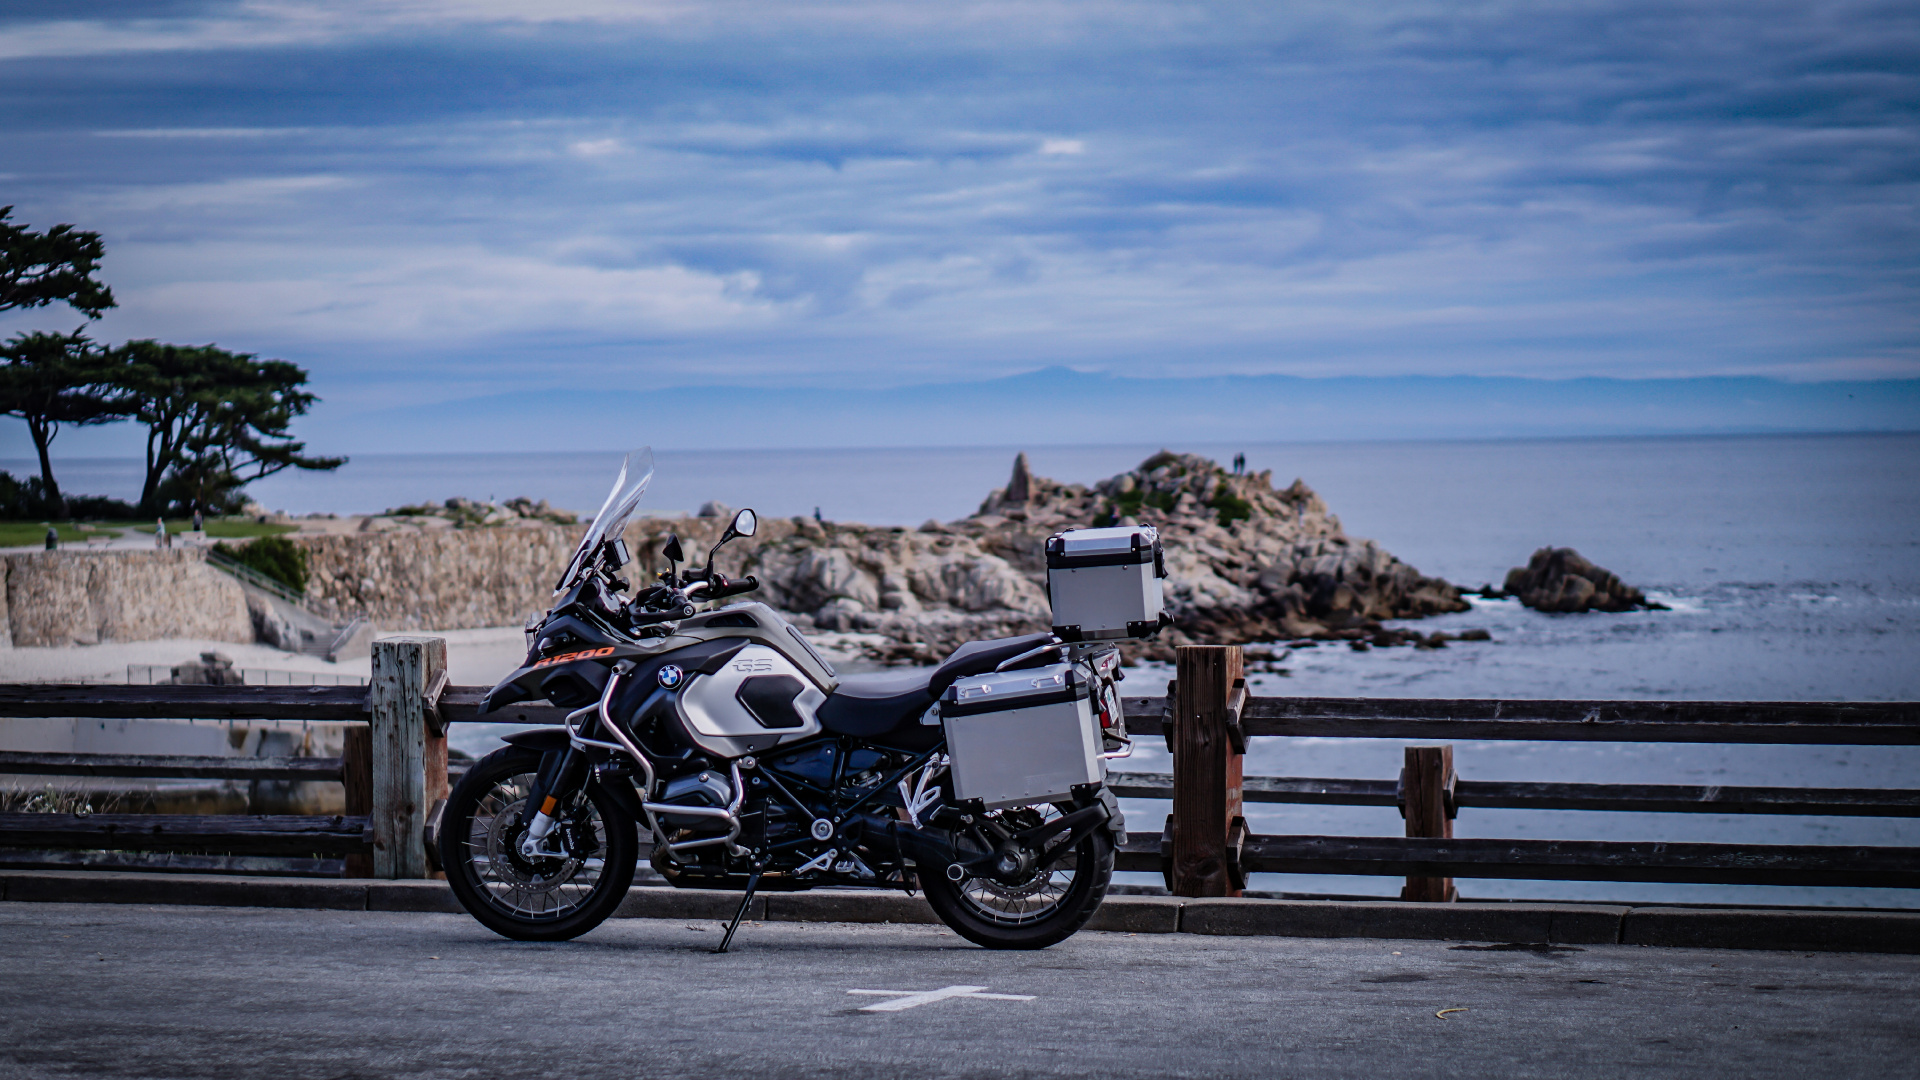 Black and Silver Motorcycle Parked on Brown Wooden Dock During Daytime. Wallpaper in 1920x1080 Resolution